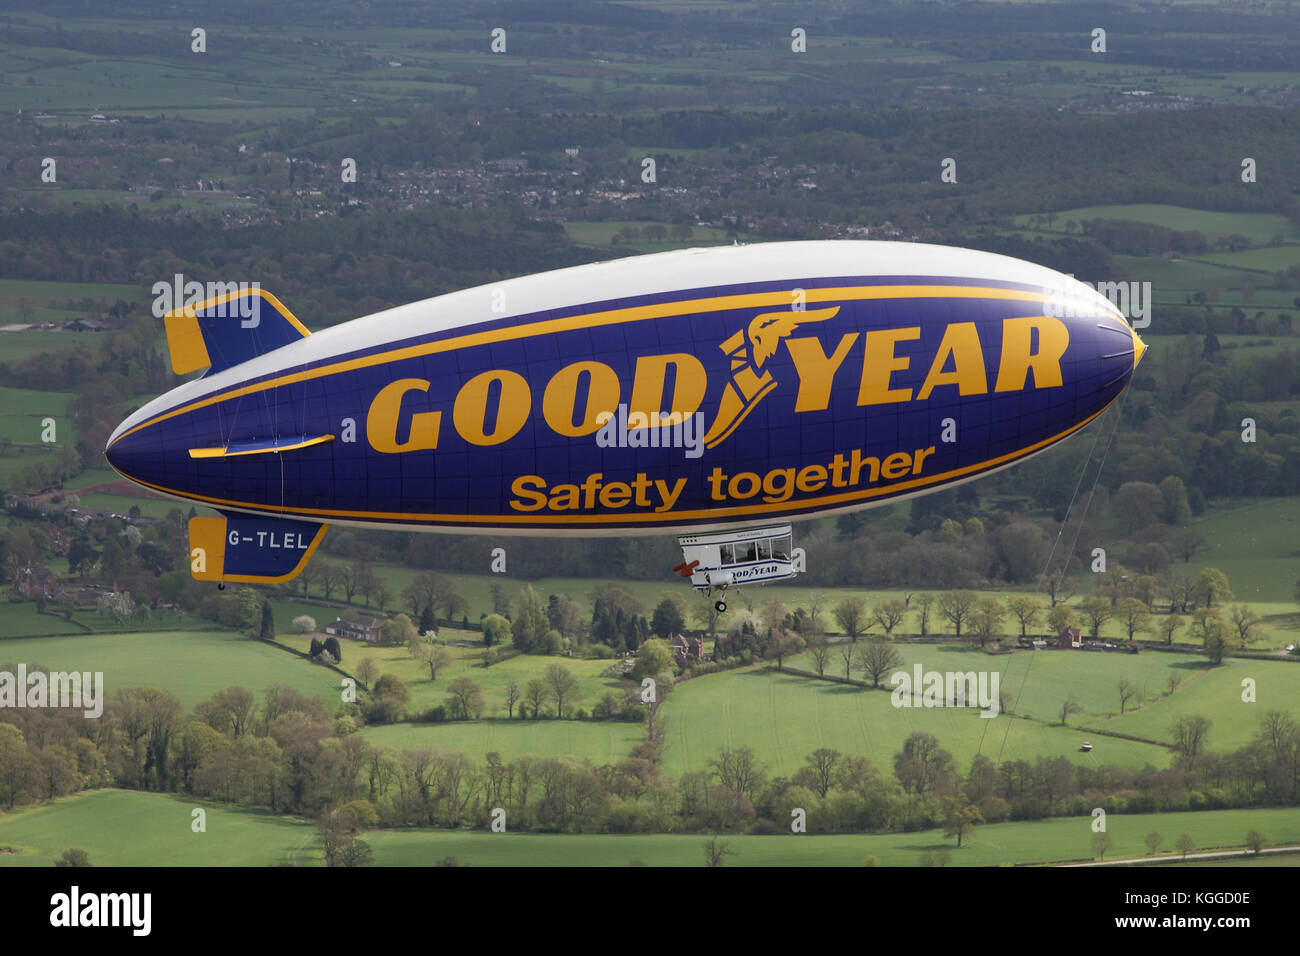 Air to air in flight Goodyear dirigible blimp / airship G-TLEL Spirit of Safety airborne flying over Shropshire countryside from Halfpenny Green. Stock Photo